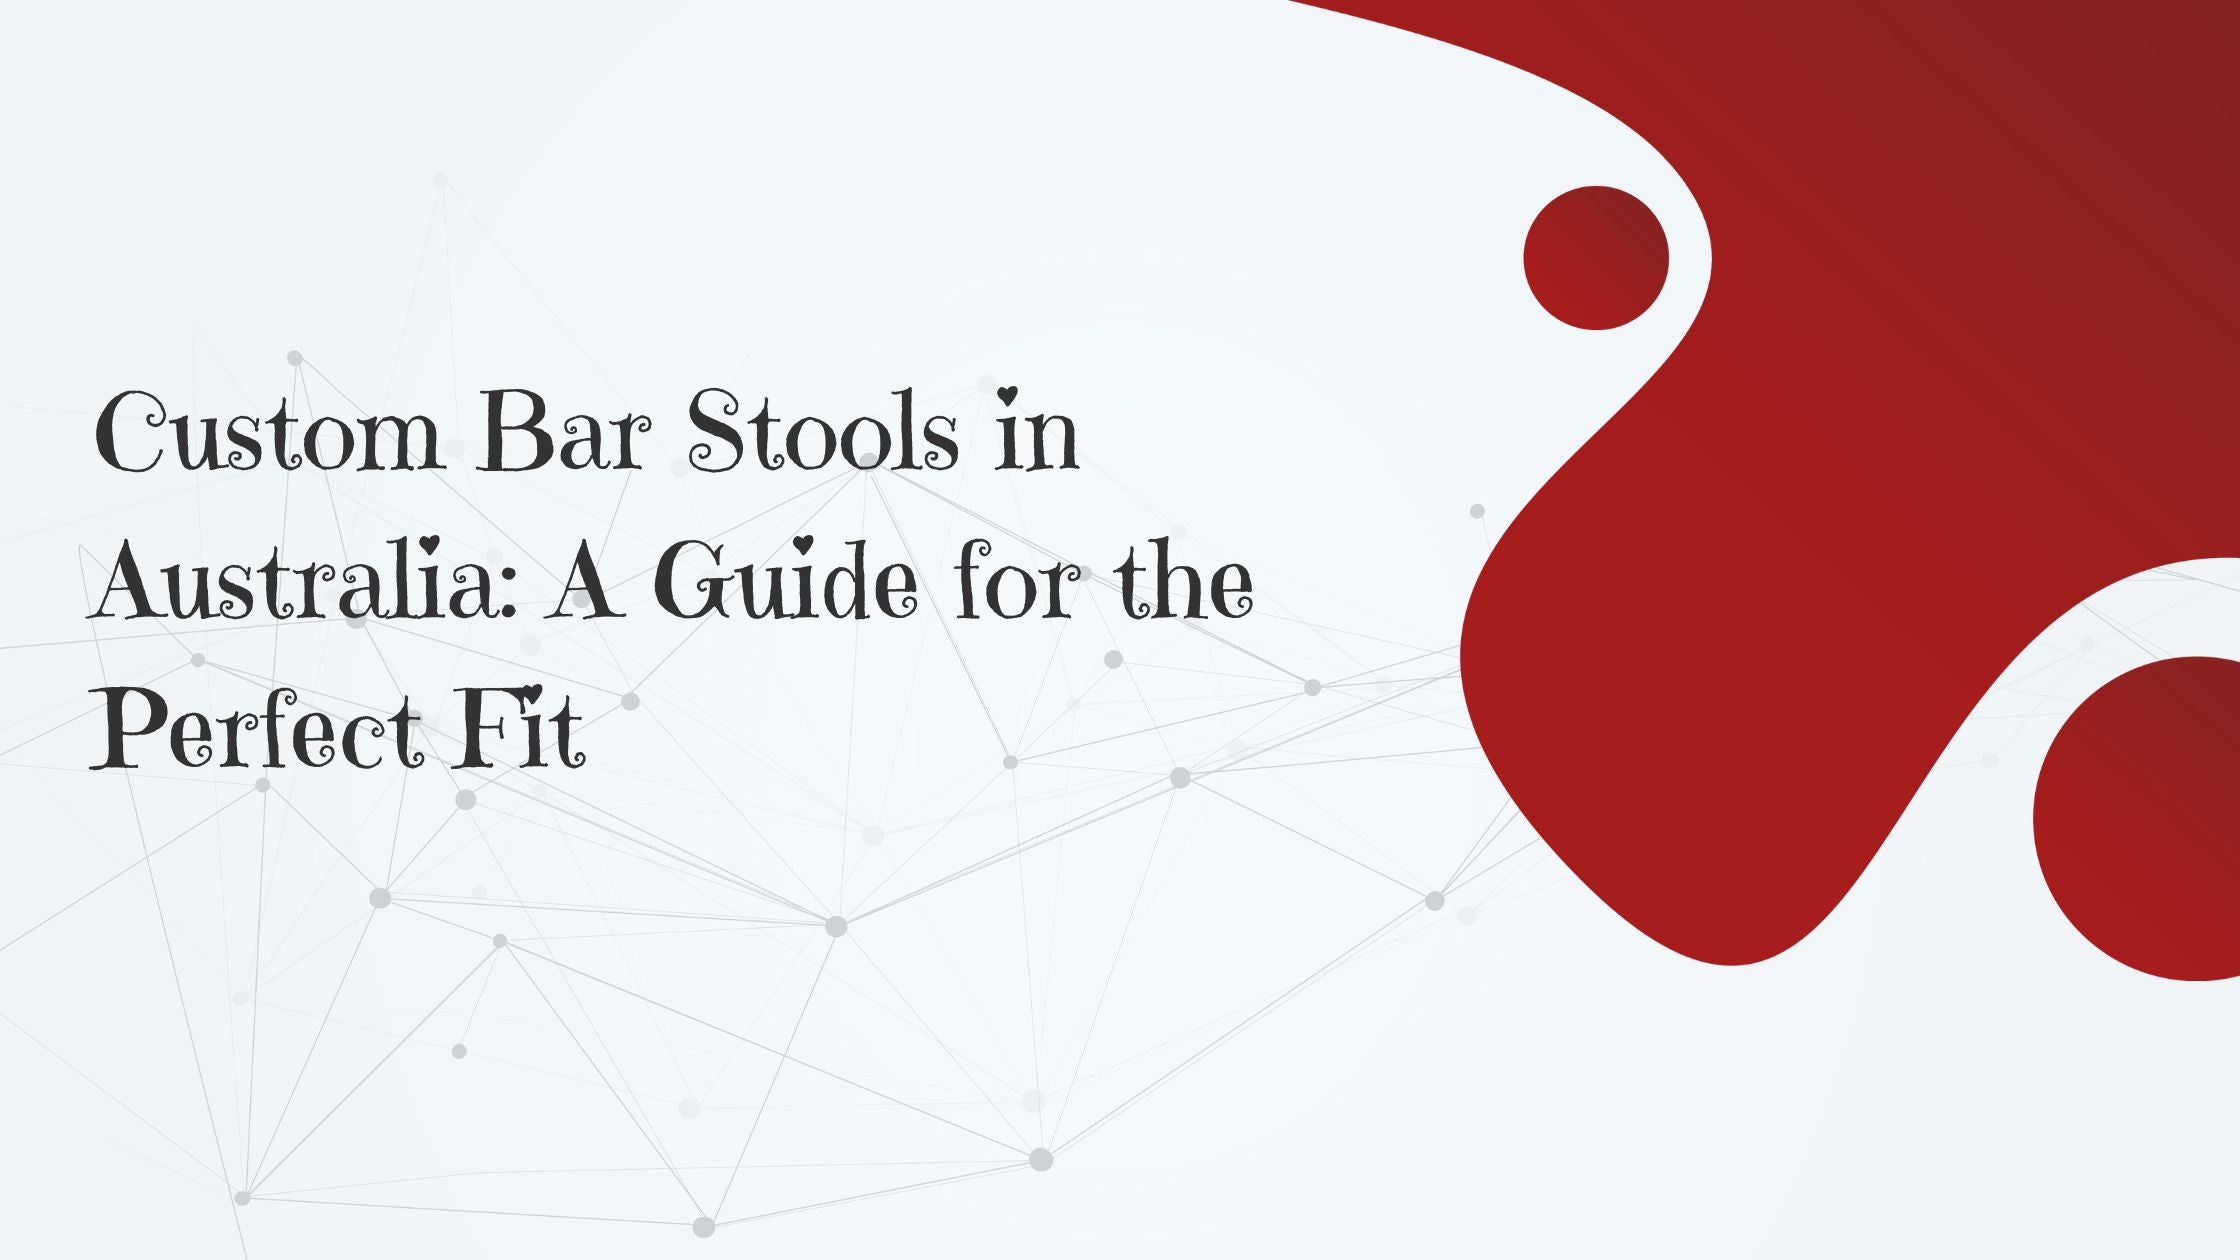 Custom Bar Stools in Australia: A Guide for the Perfect Fit